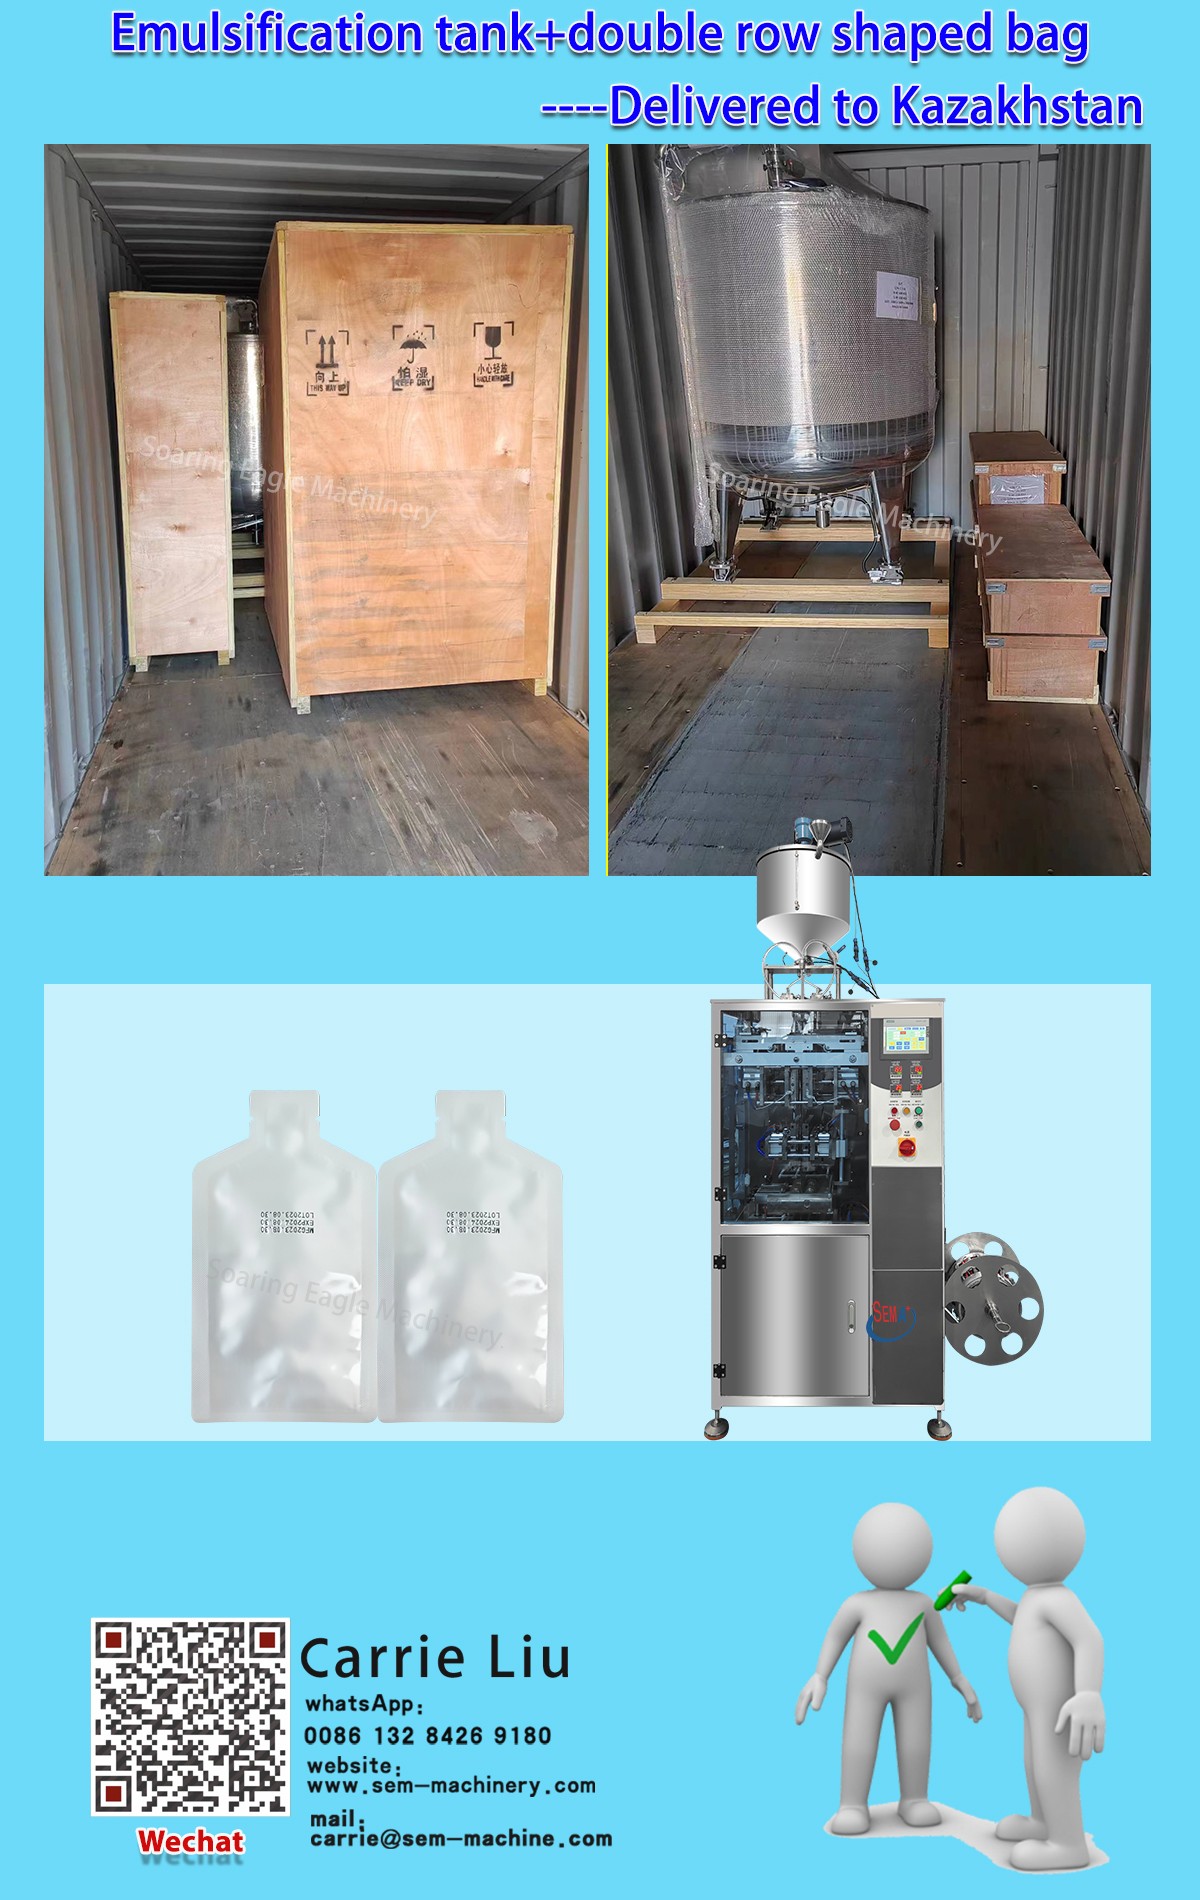 Emulsification tank and double row shaped bag -delivered to Kazakhstan